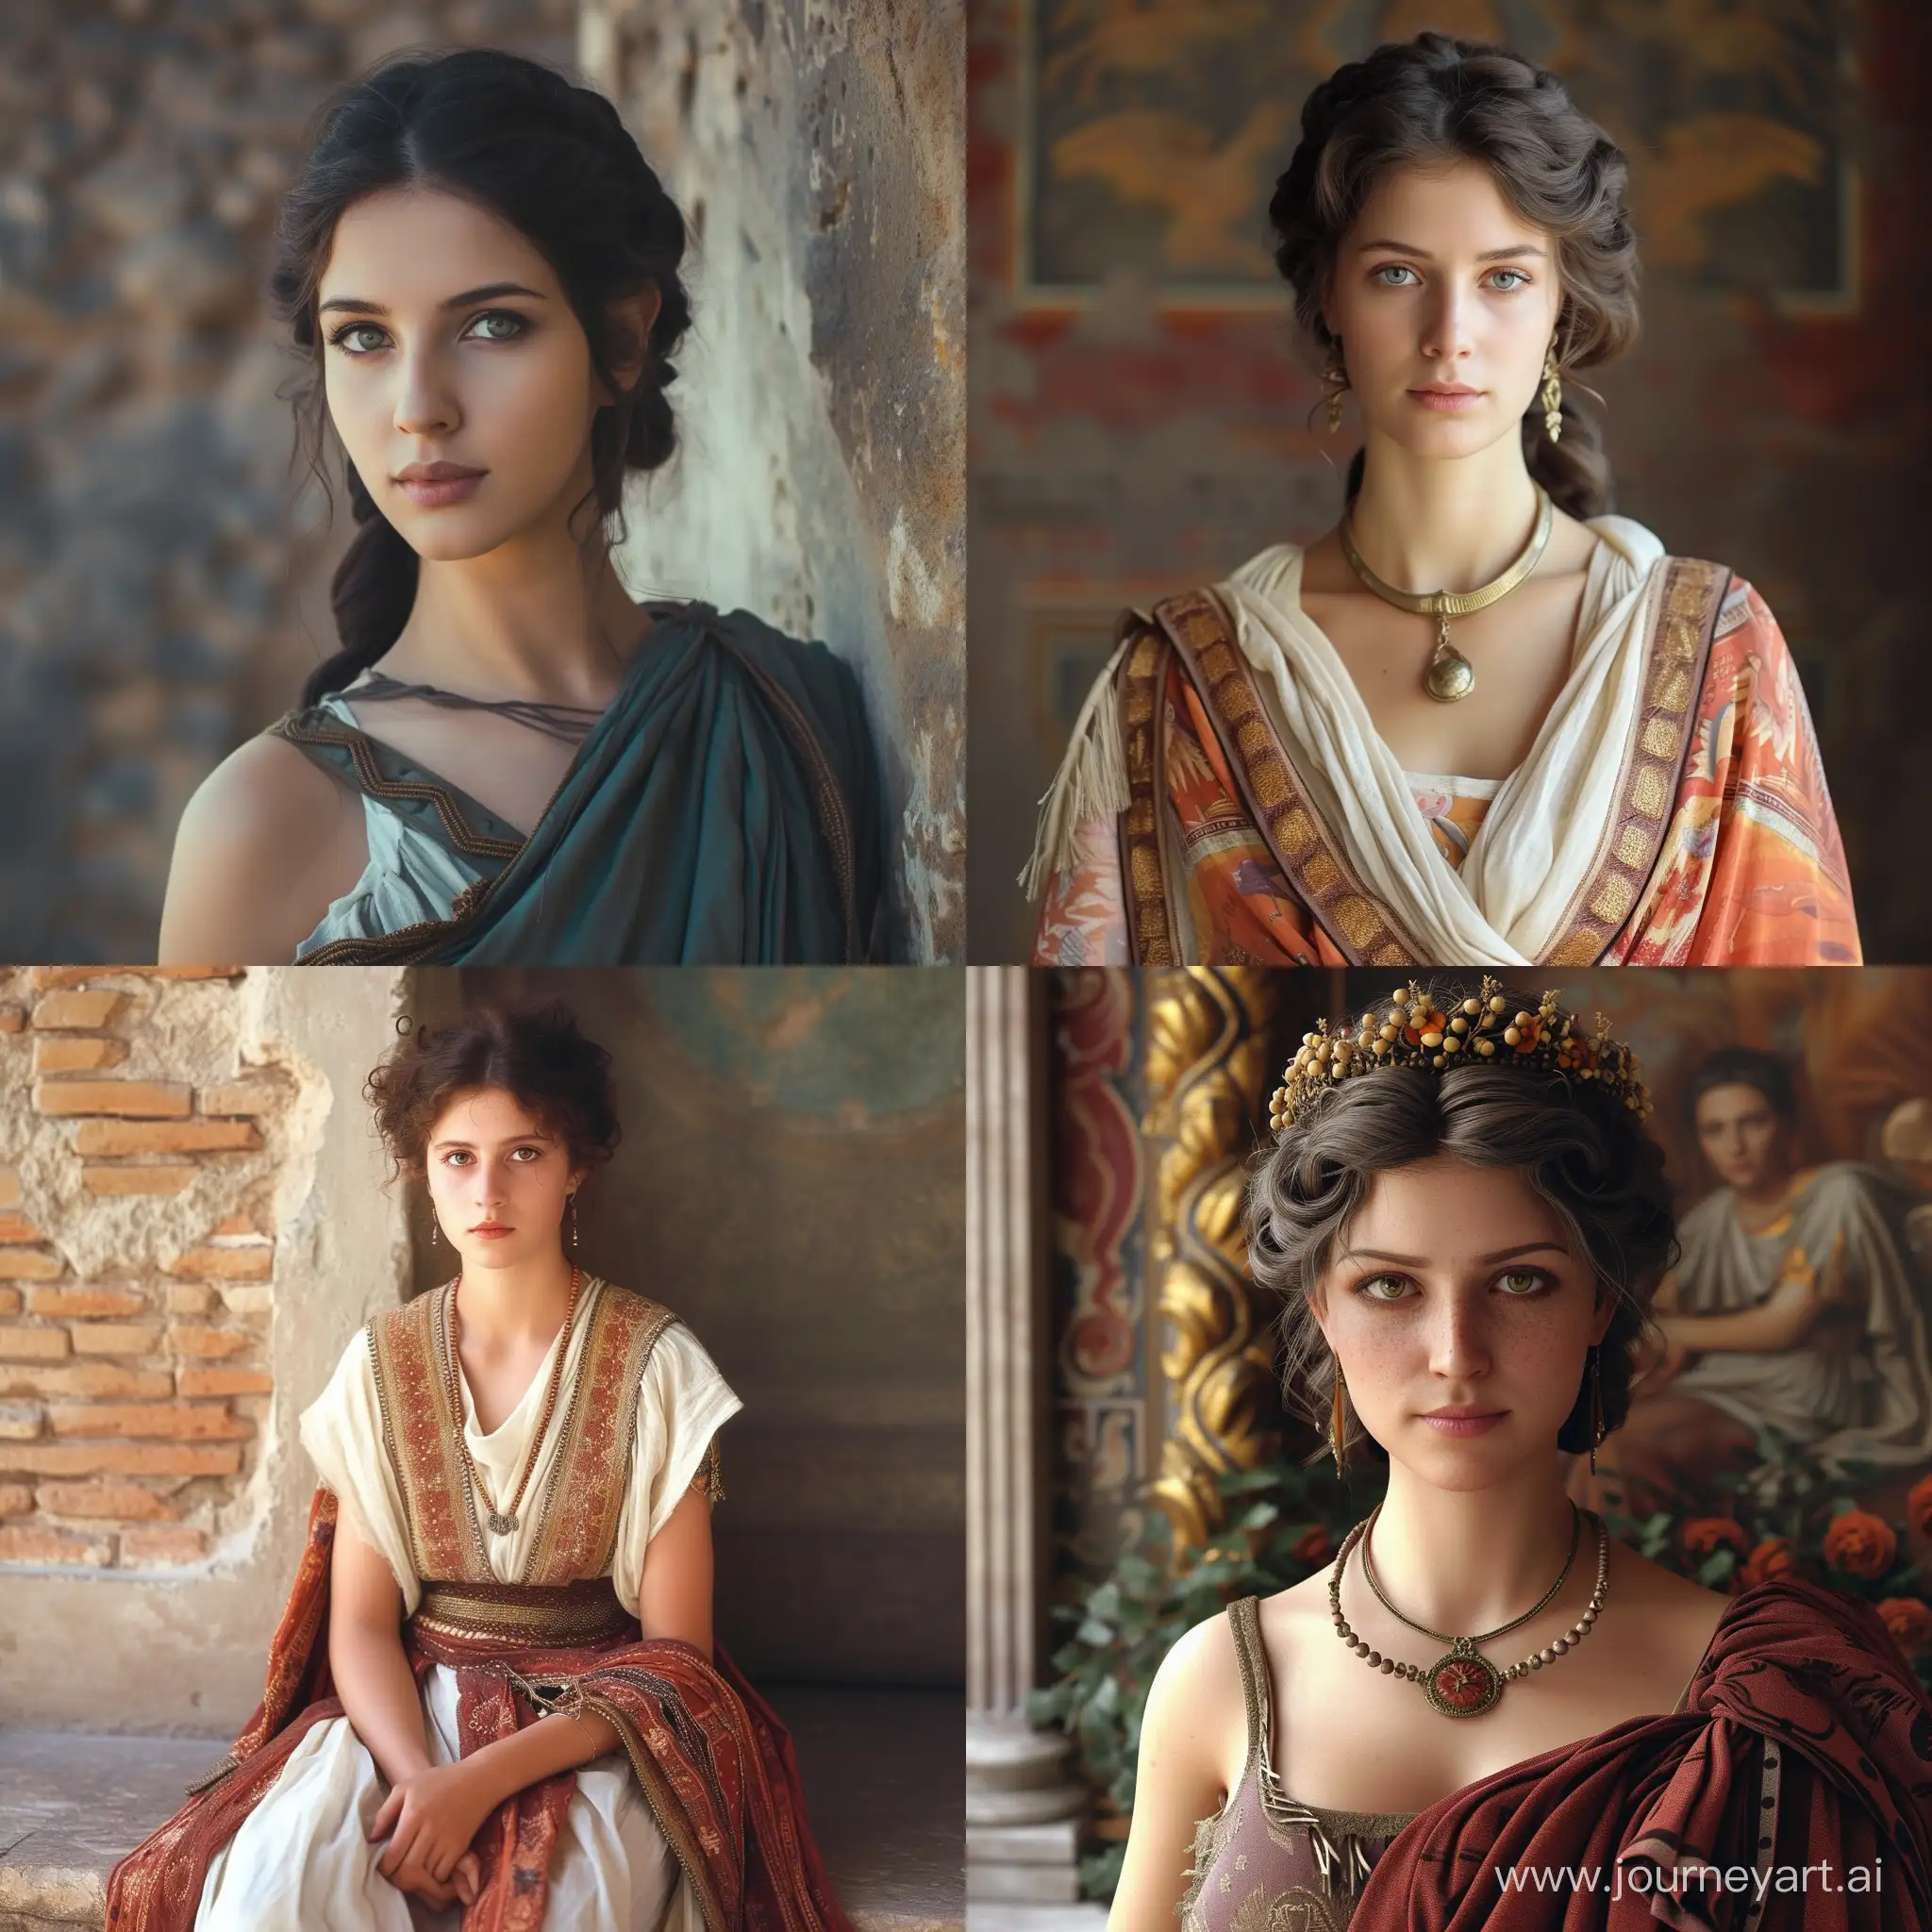 Graceful-Ancient-Roman-Woman-in-a-Stunning-Portrait